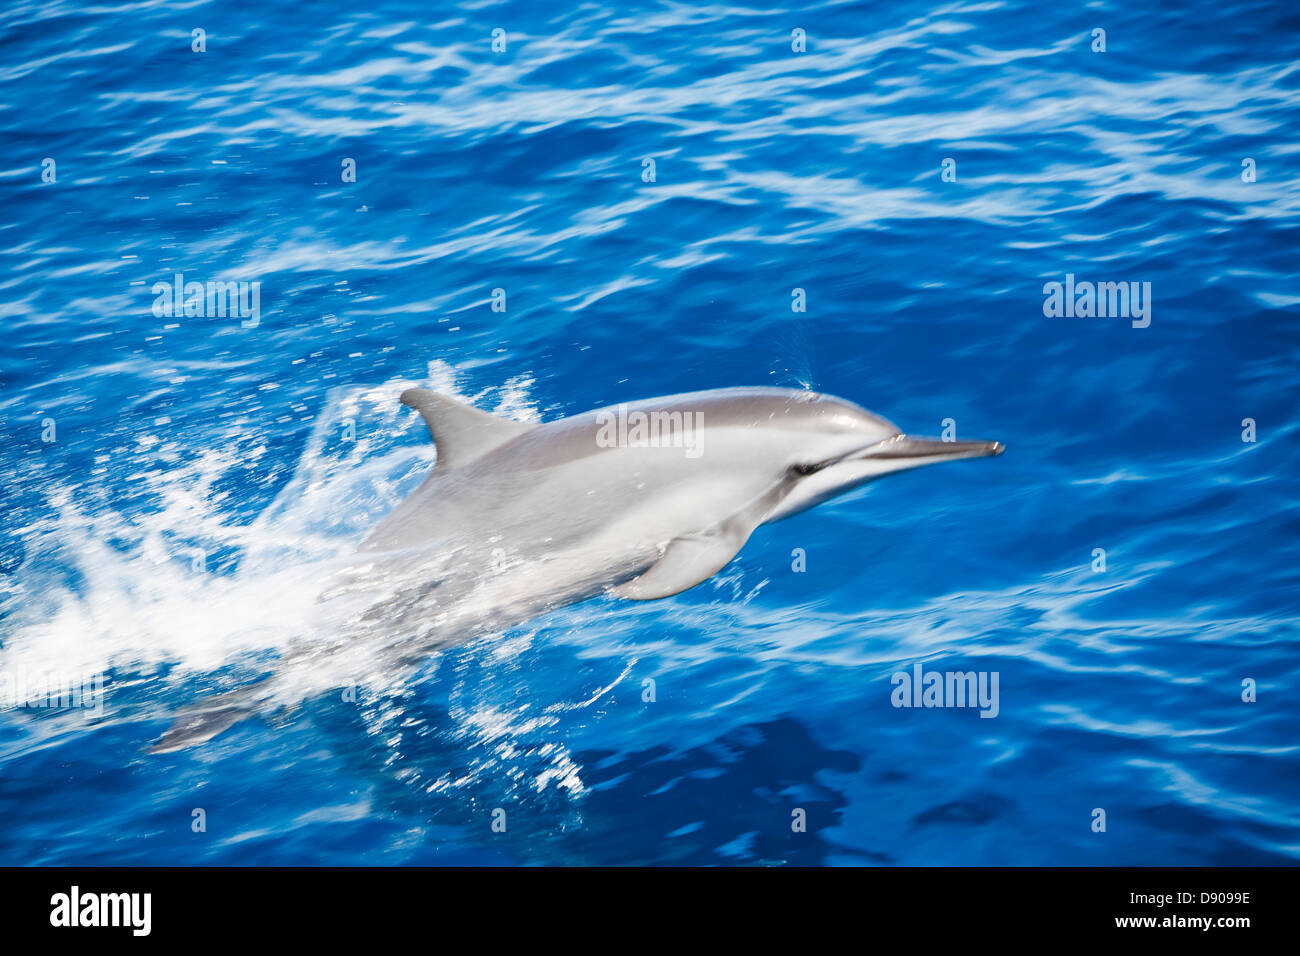 Jumping dolphin in the ocean, the Maldives. Stock Photo